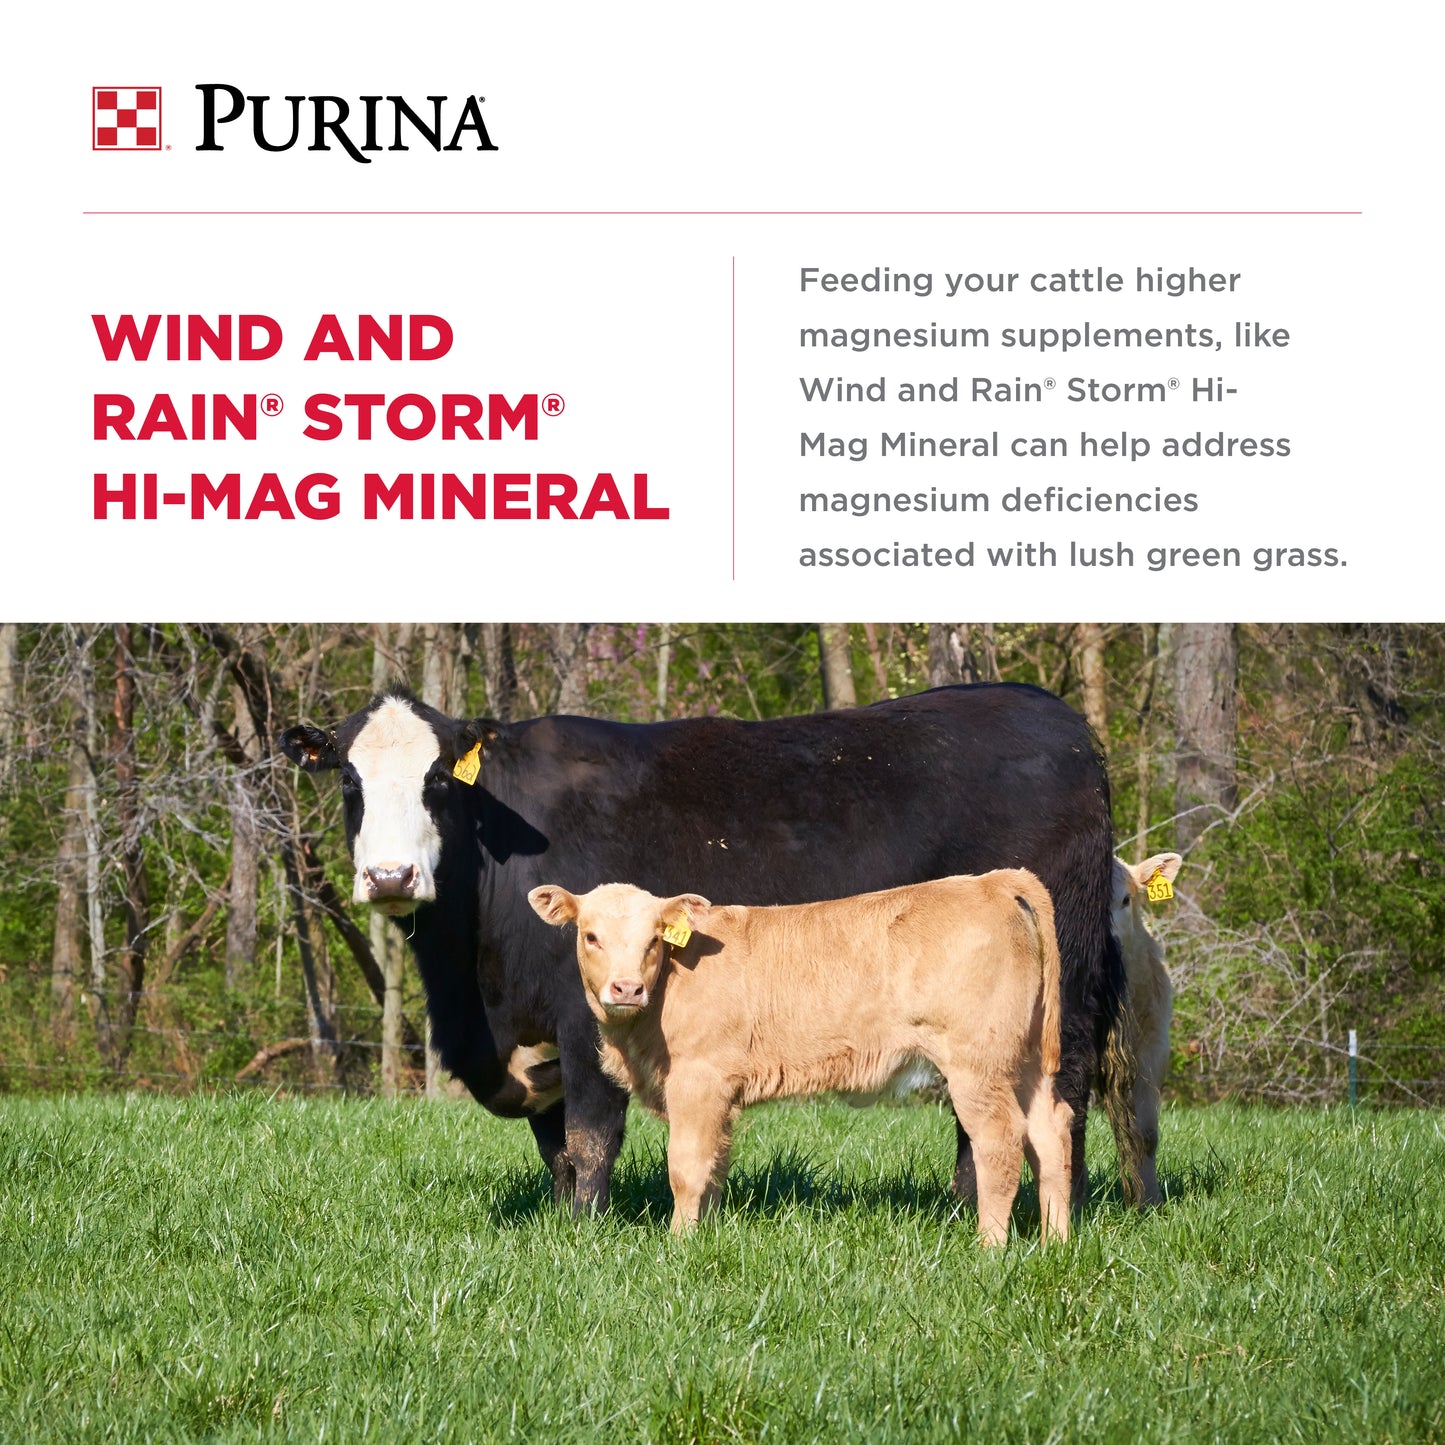 Formulated with 10% magnesium which supports the prevention of grass tetany